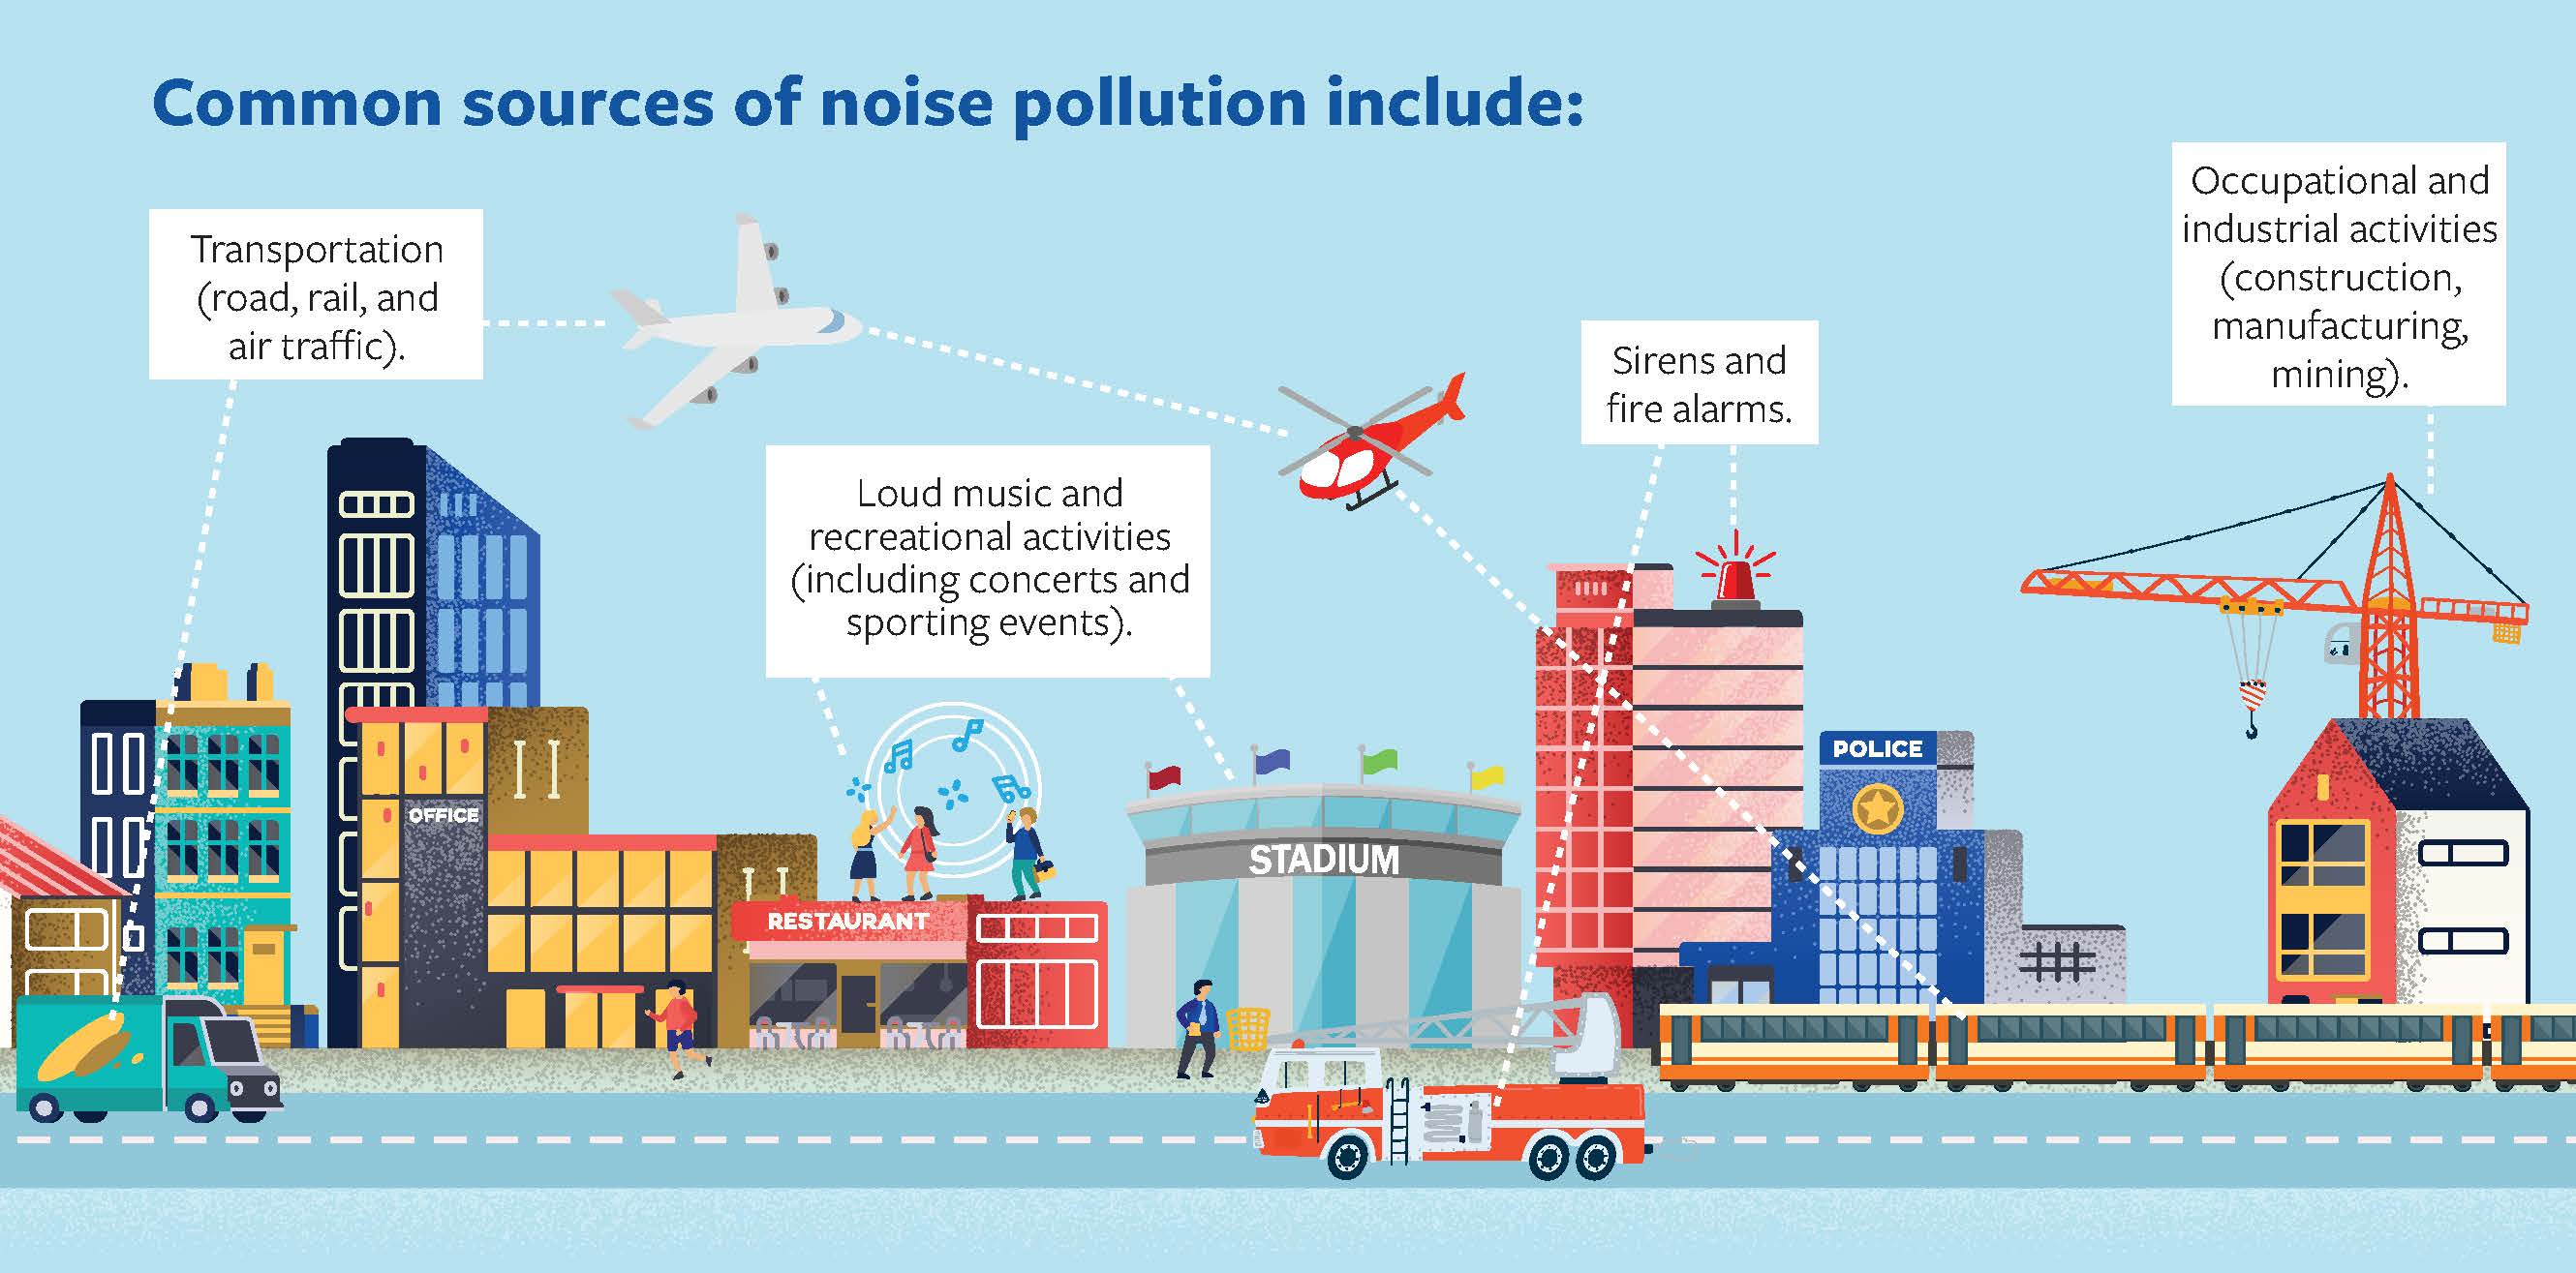 Common sources of noise pollution include: Transportation (road, rail, and air traffic). Loud music and recreational activities (including concerts and sporting events). Sirens and fire alarms. Occupational and industrial activities (construction, manufacturing, mining).